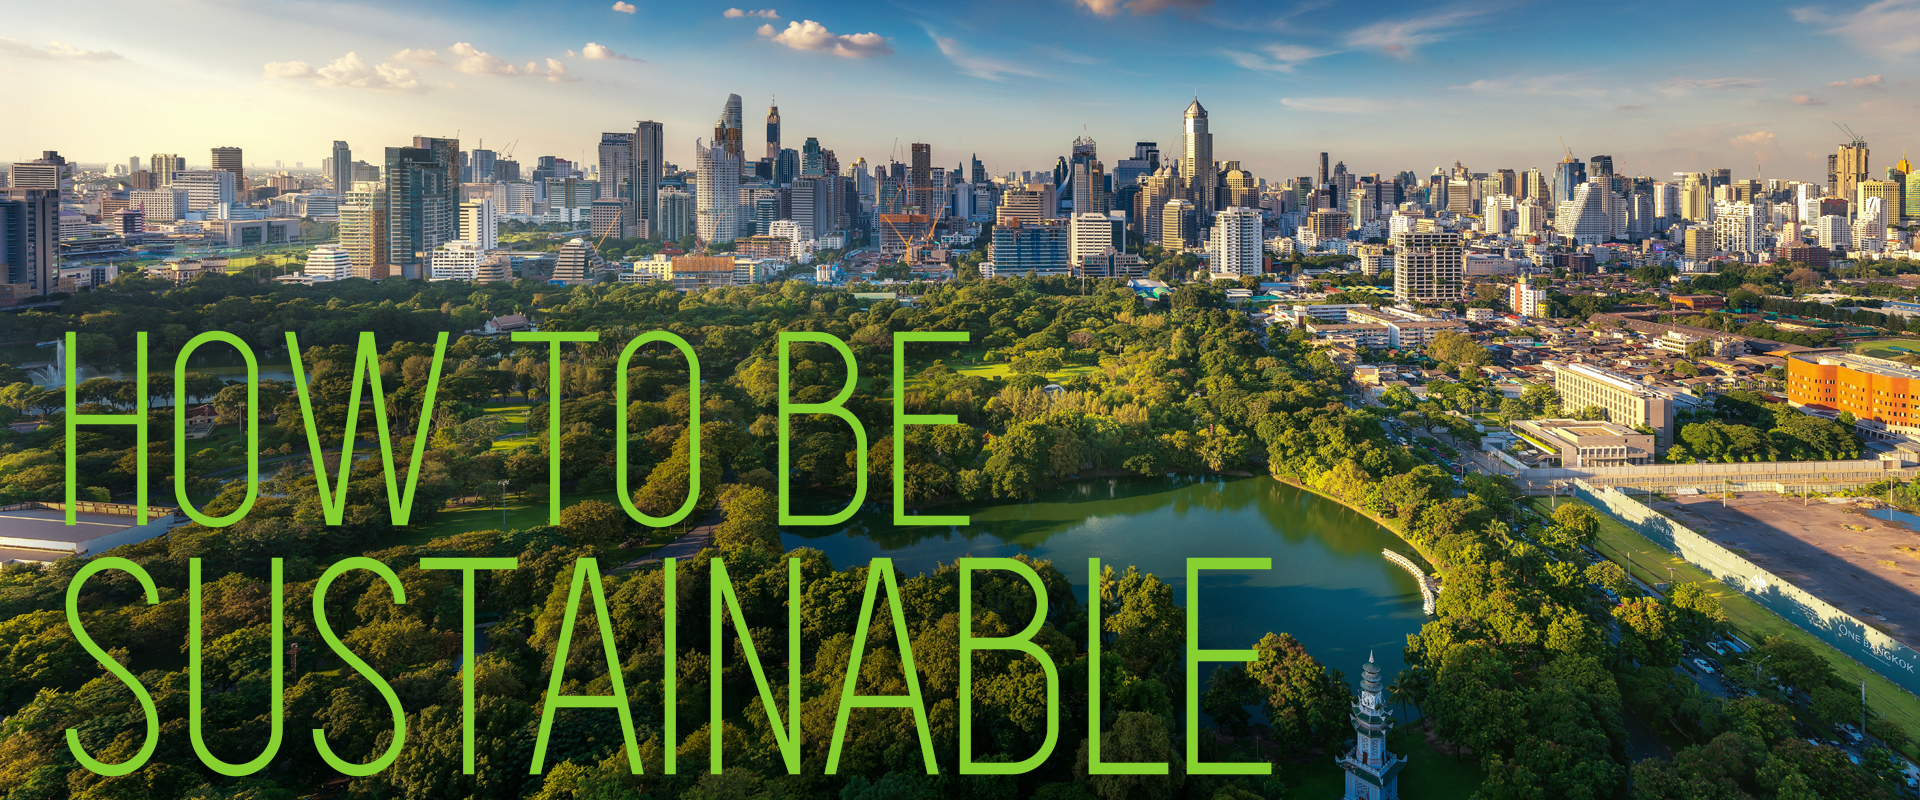 HOW TO BE SUSTAINABLE - Sustainable Business International